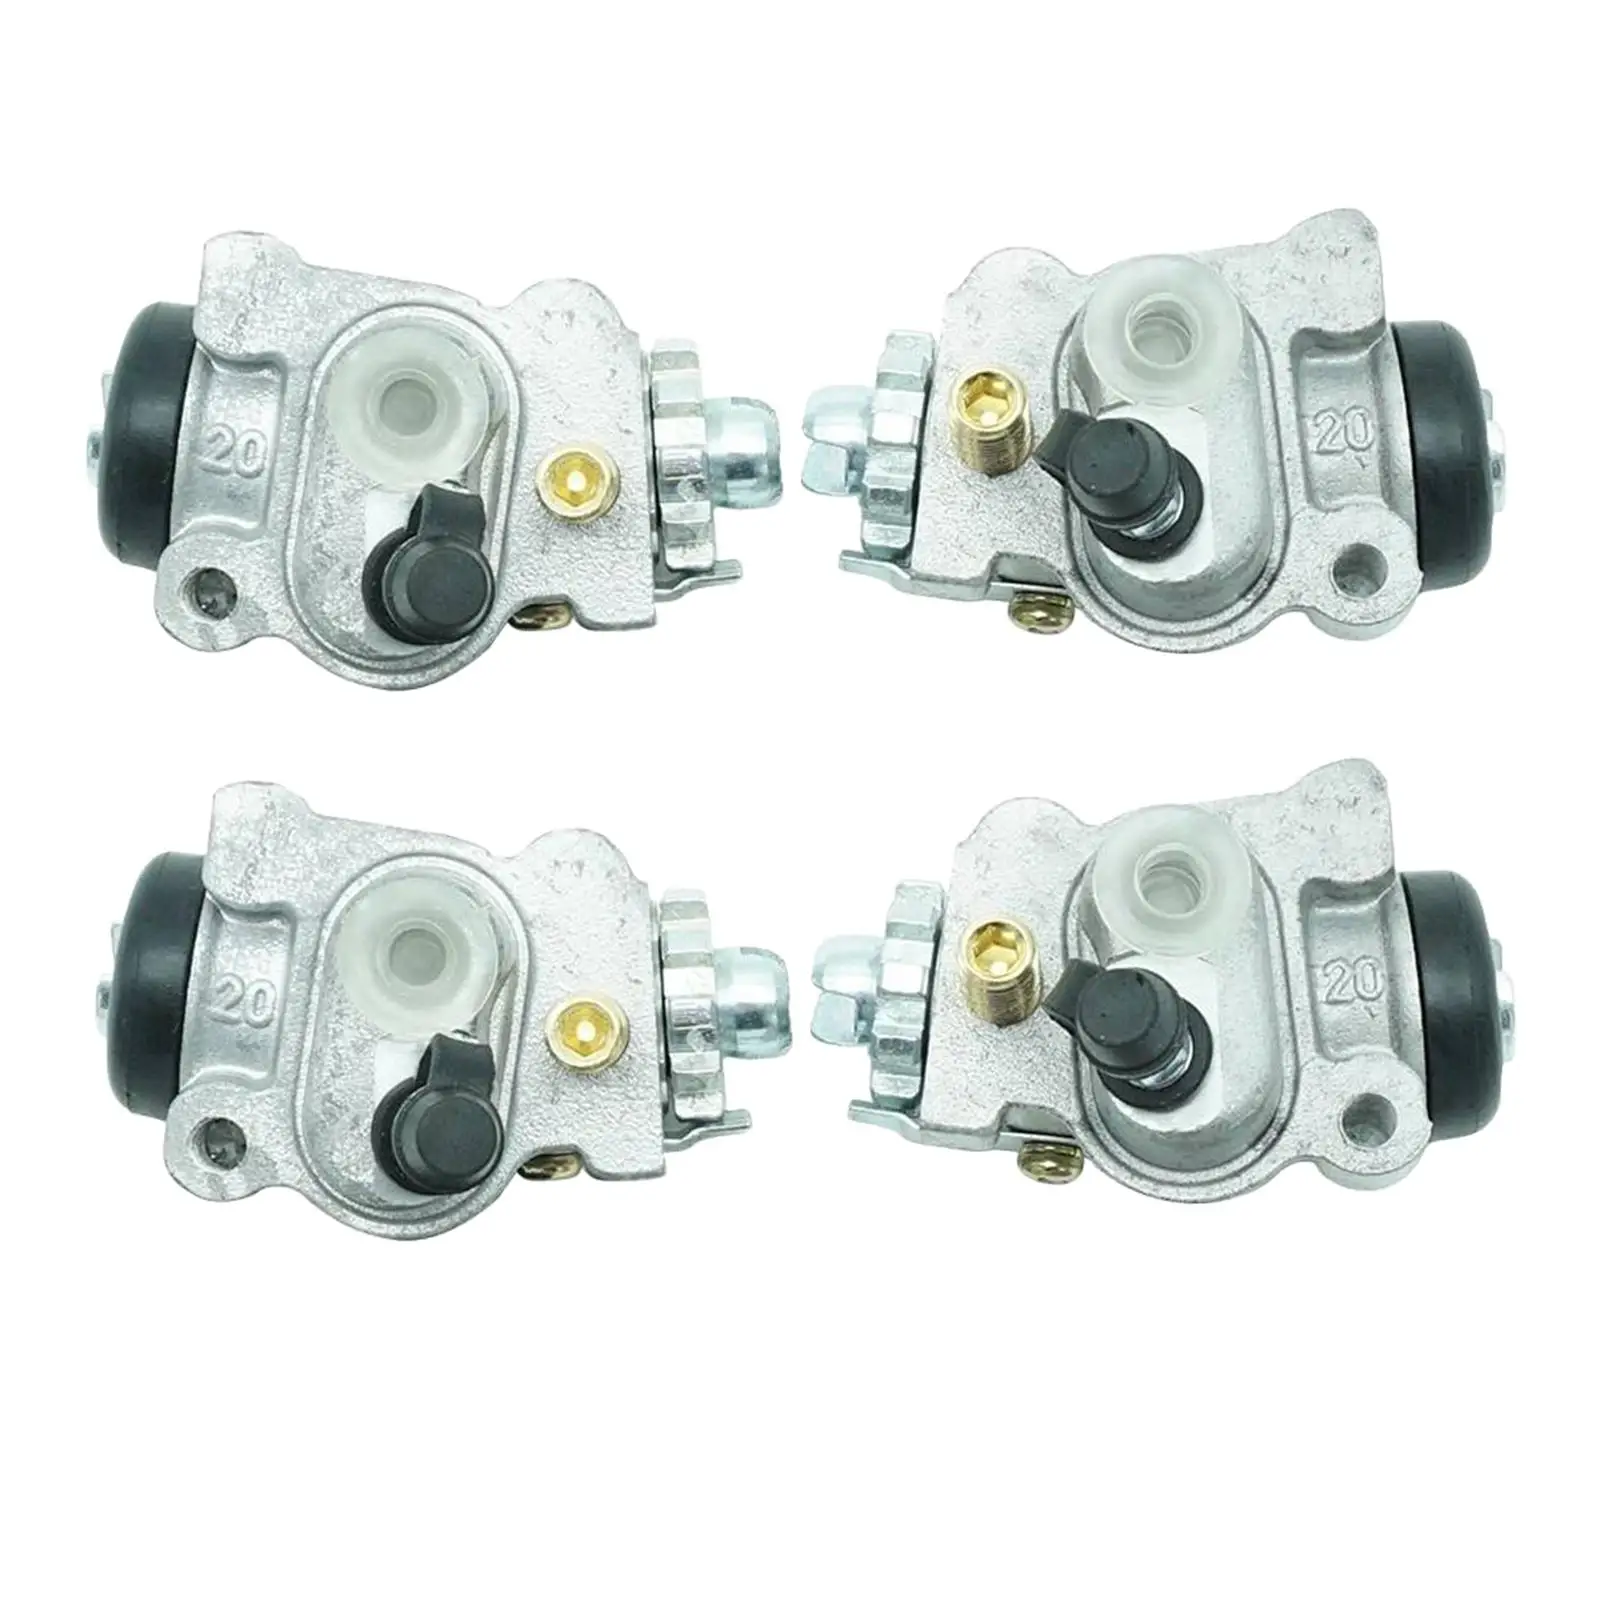 4Pcs Front Brake Wheel Cylinders for Honda Foreman 450 Replacement Easy to Install